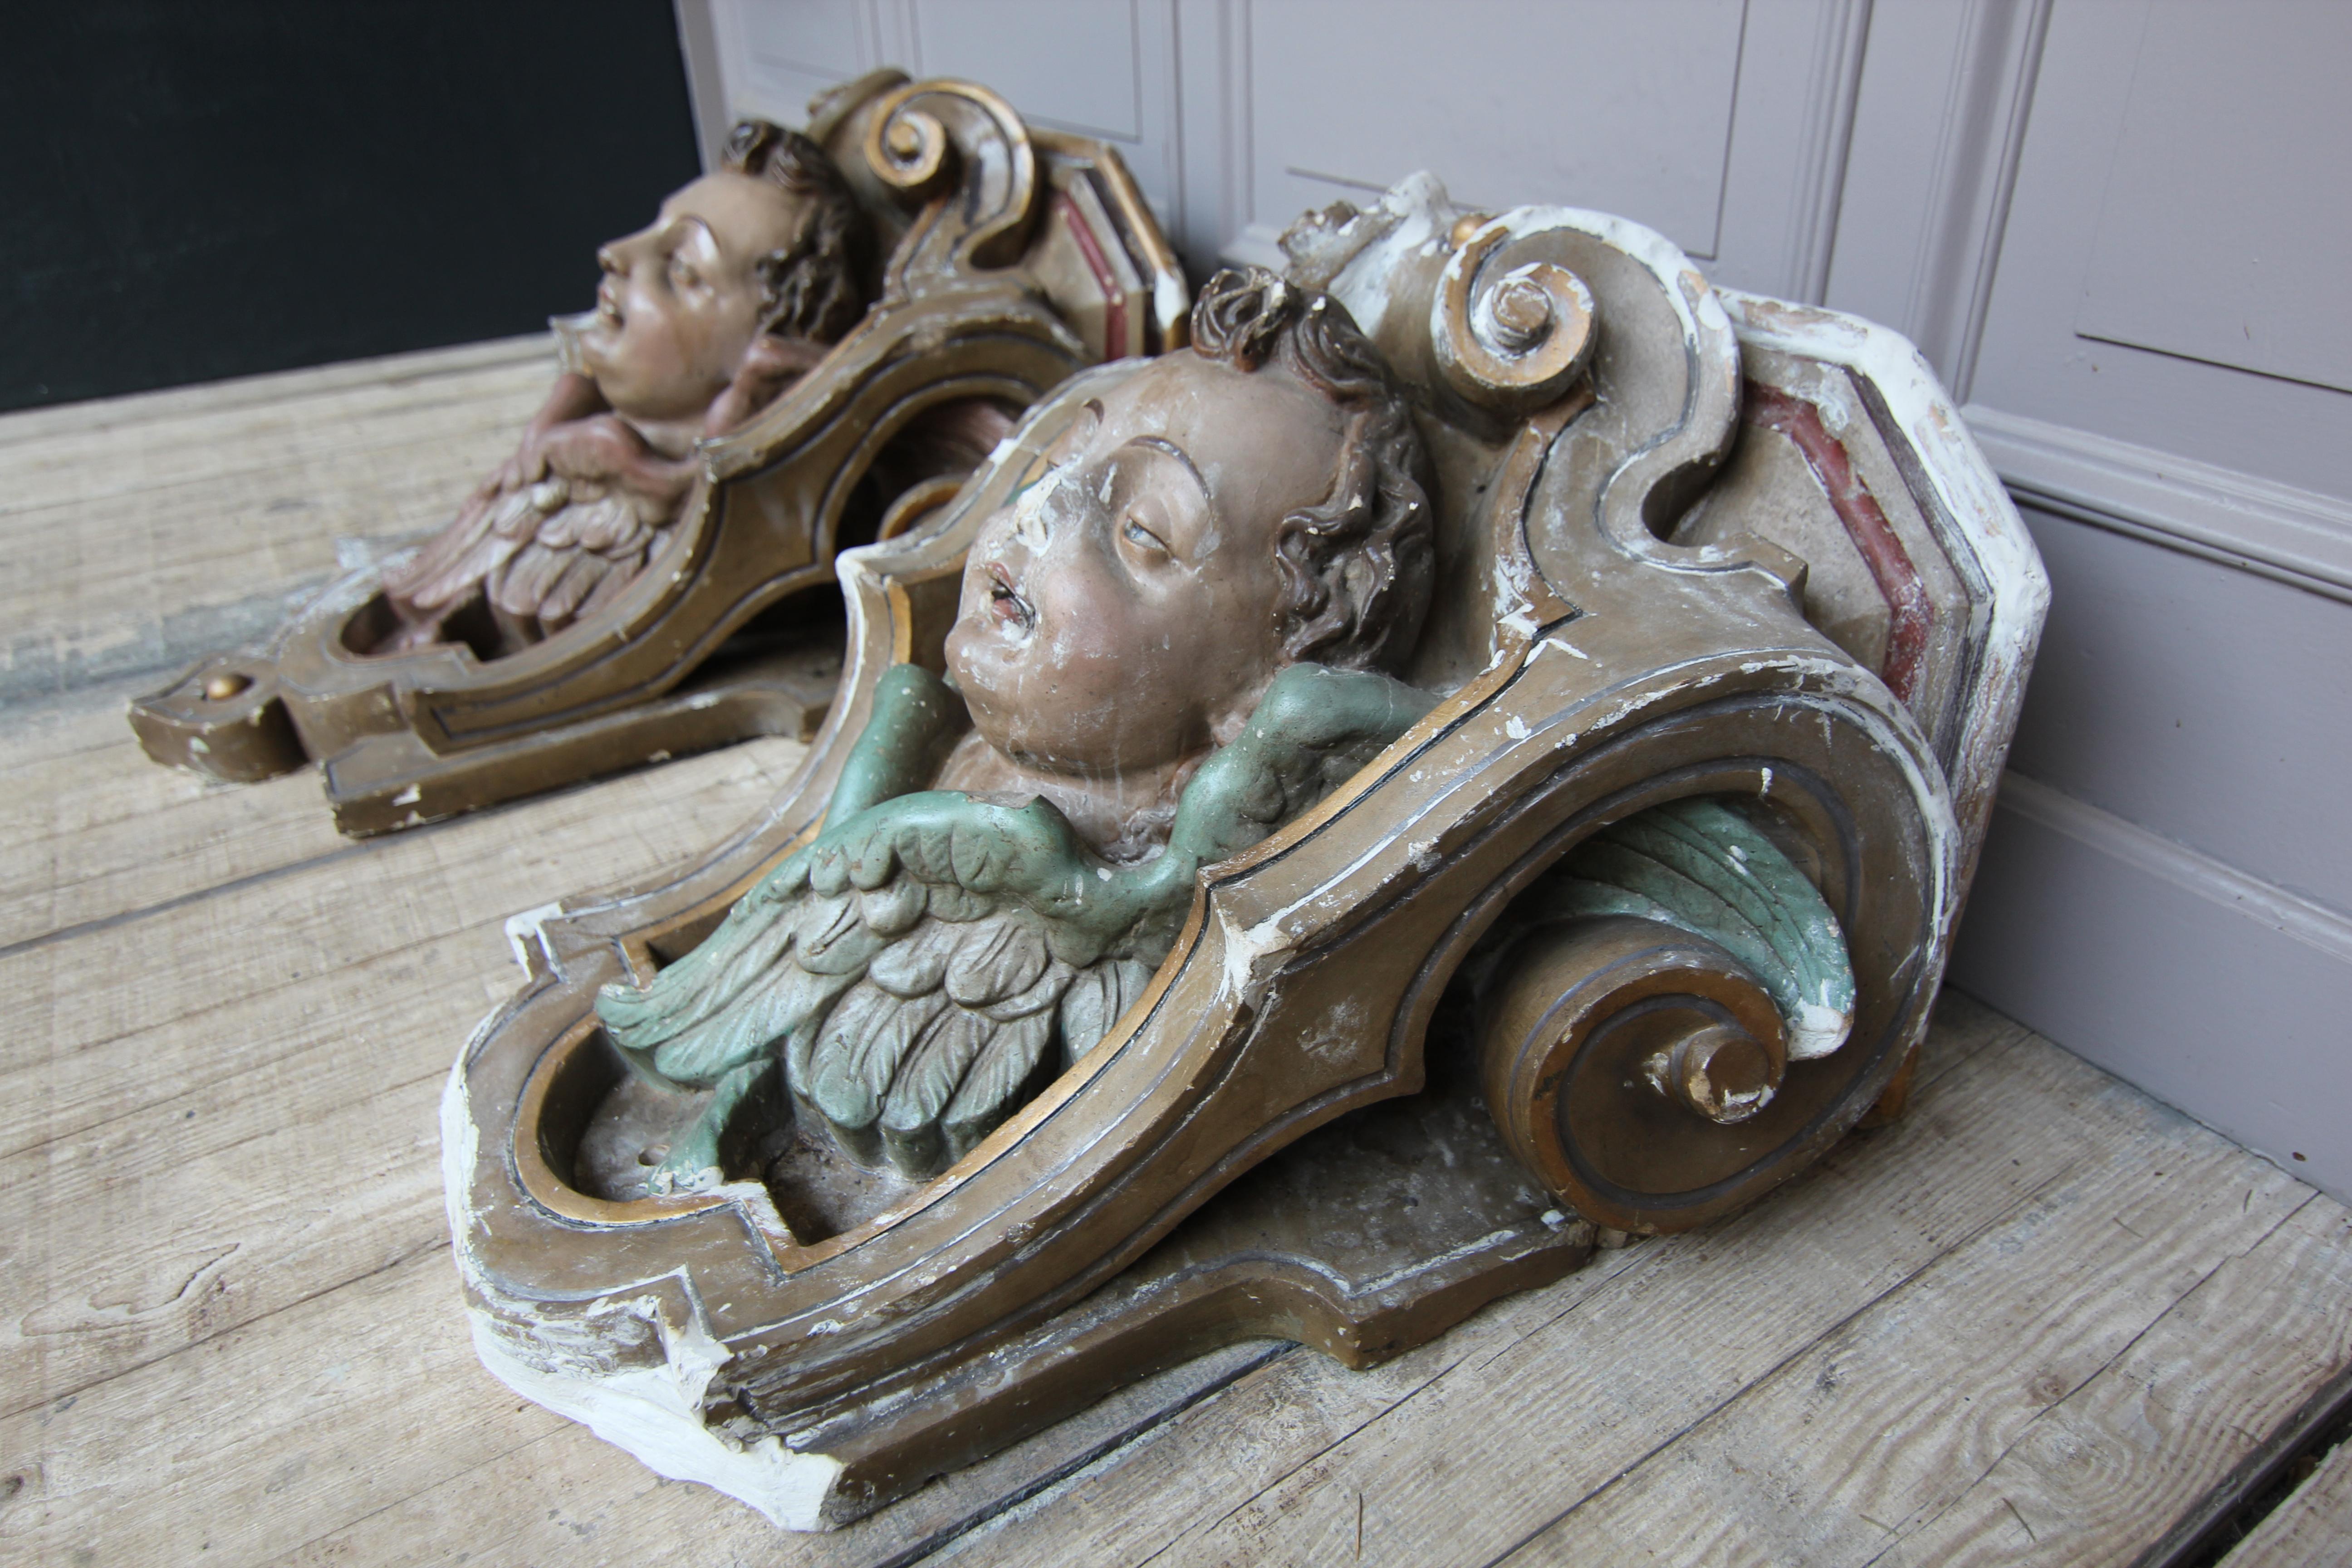 19th Century Rococo Revival Putti Wall Brackets made of Plaster, Set of 2 In Fair Condition For Sale In Dusseldorf, DE